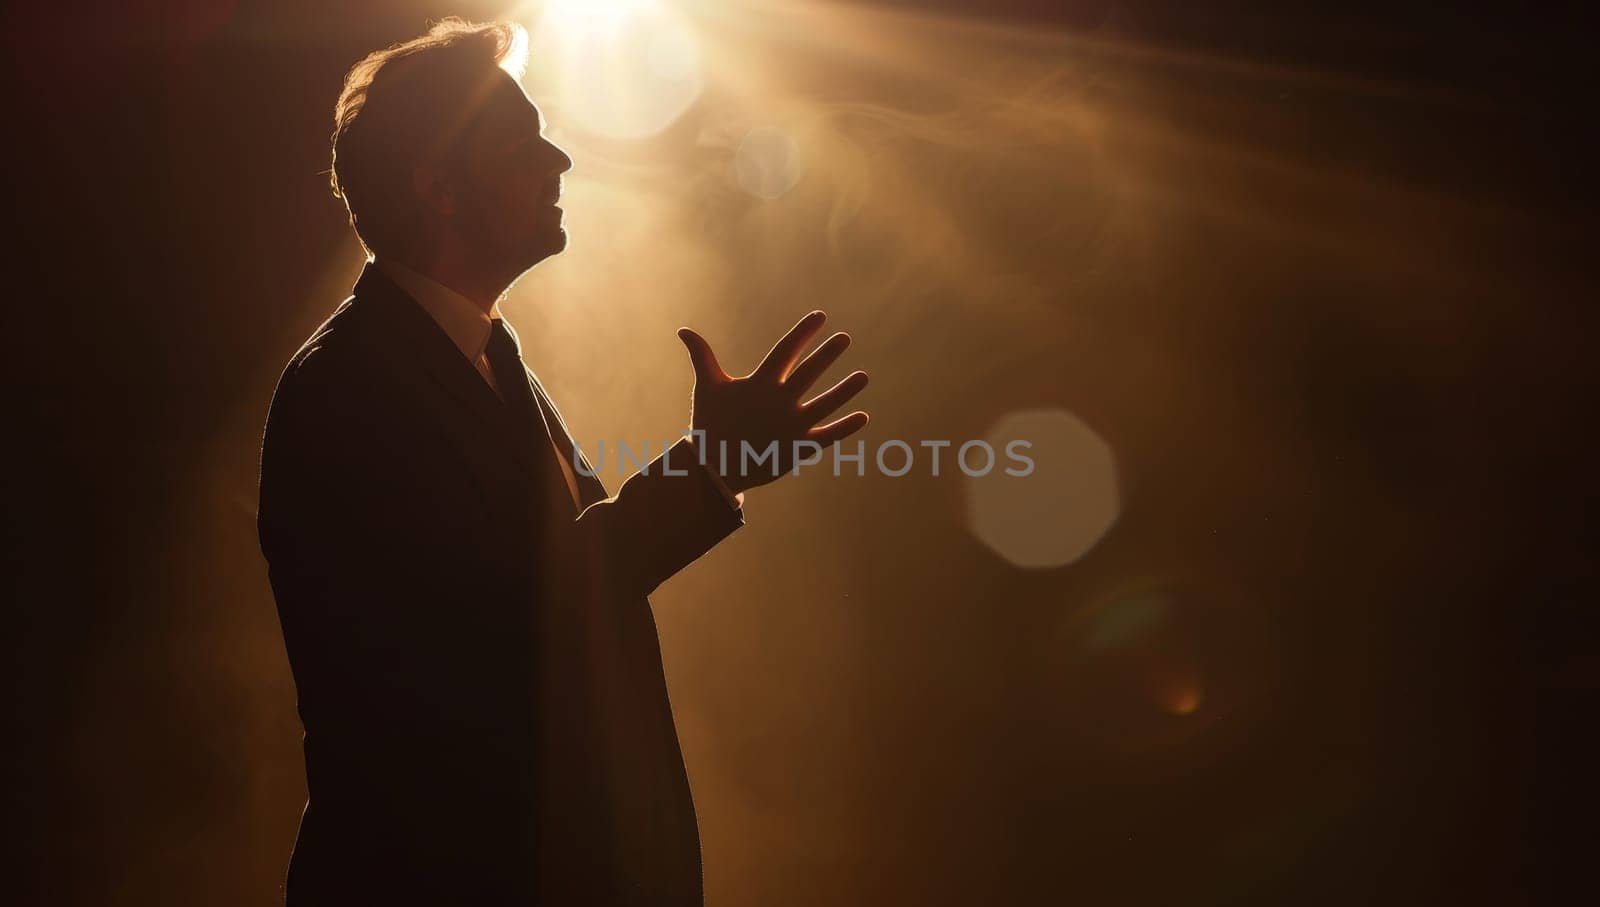 A man in a suit applauds at a concert in the spotlight